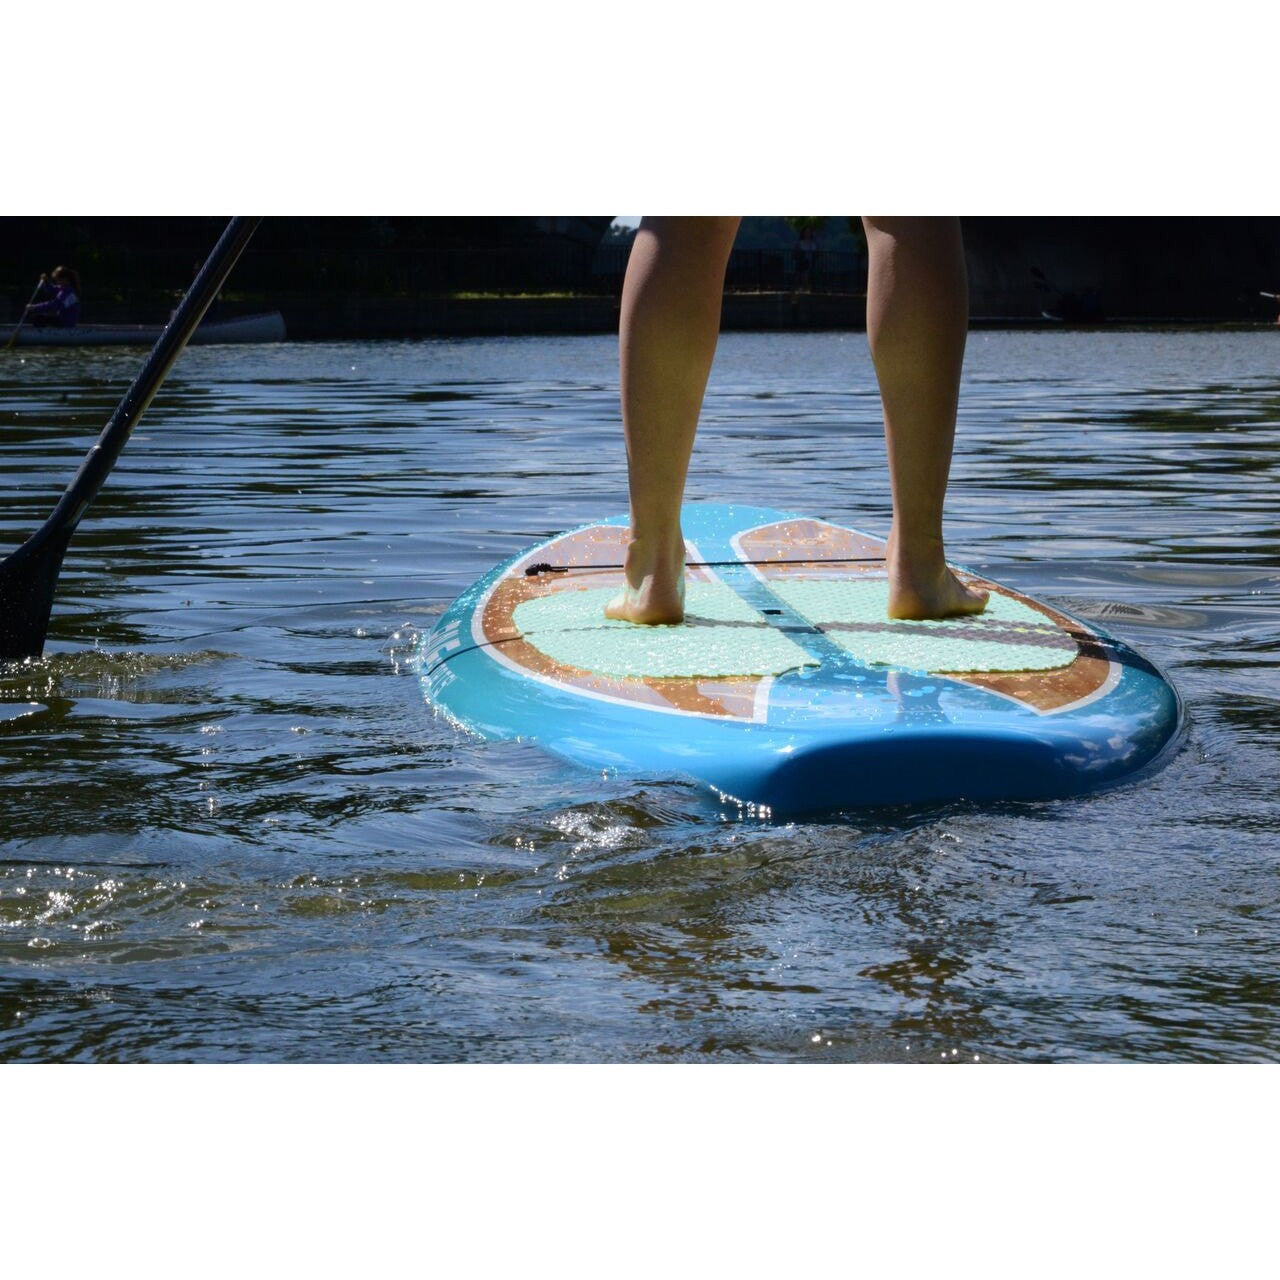 Rave Sports Shoreline Series SS110 Stand Up Paddle Board SUP - 02728